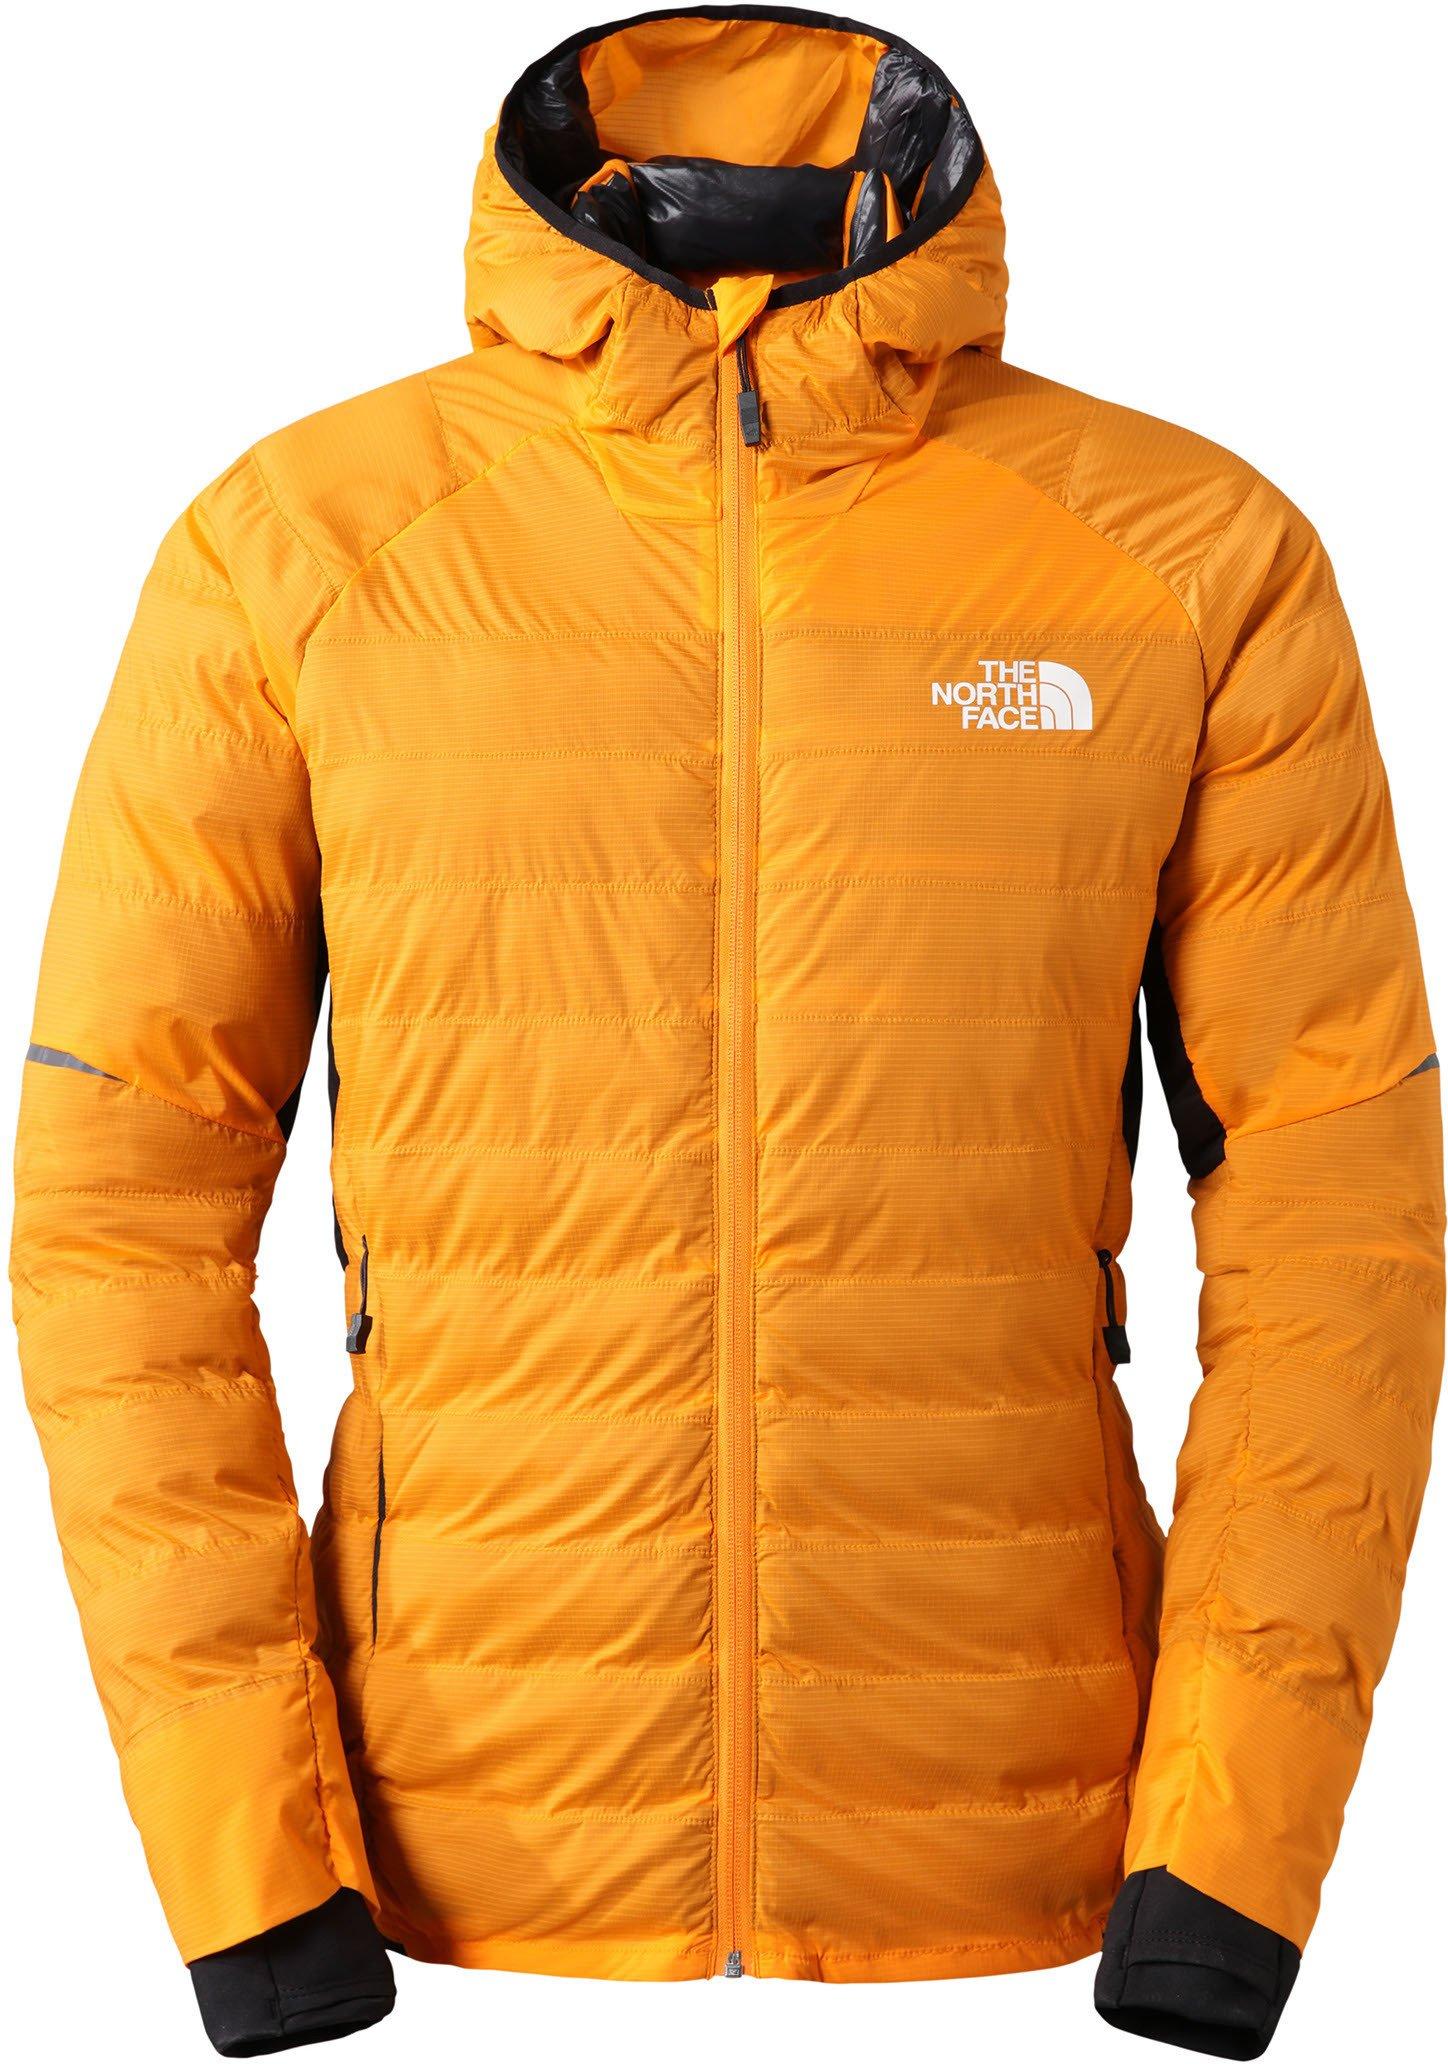 The North Face Men’s Dawn Turn 50/50 Synthetic XL